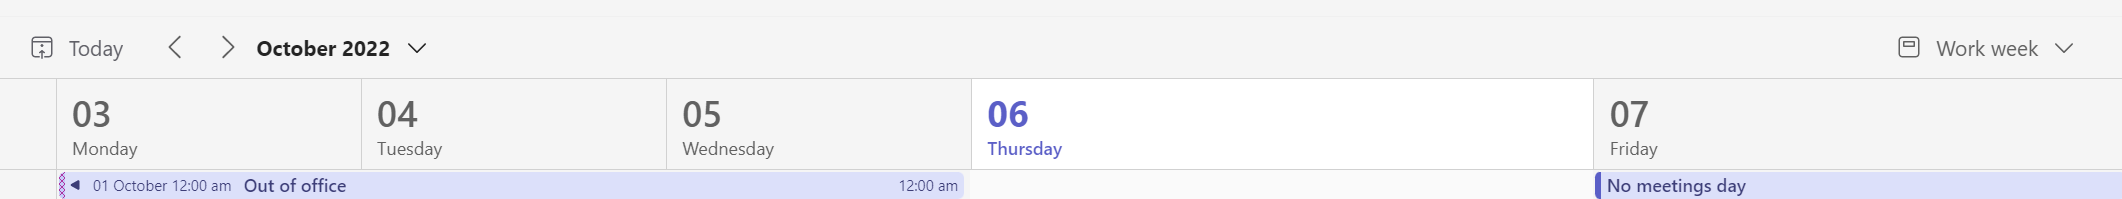 We understand that our user's focus is more inclined towards today and tomorrow's events when on calendar (for week and workweek view). With this release, today and tomorrow will have more room within the calendar grid compared to other days.